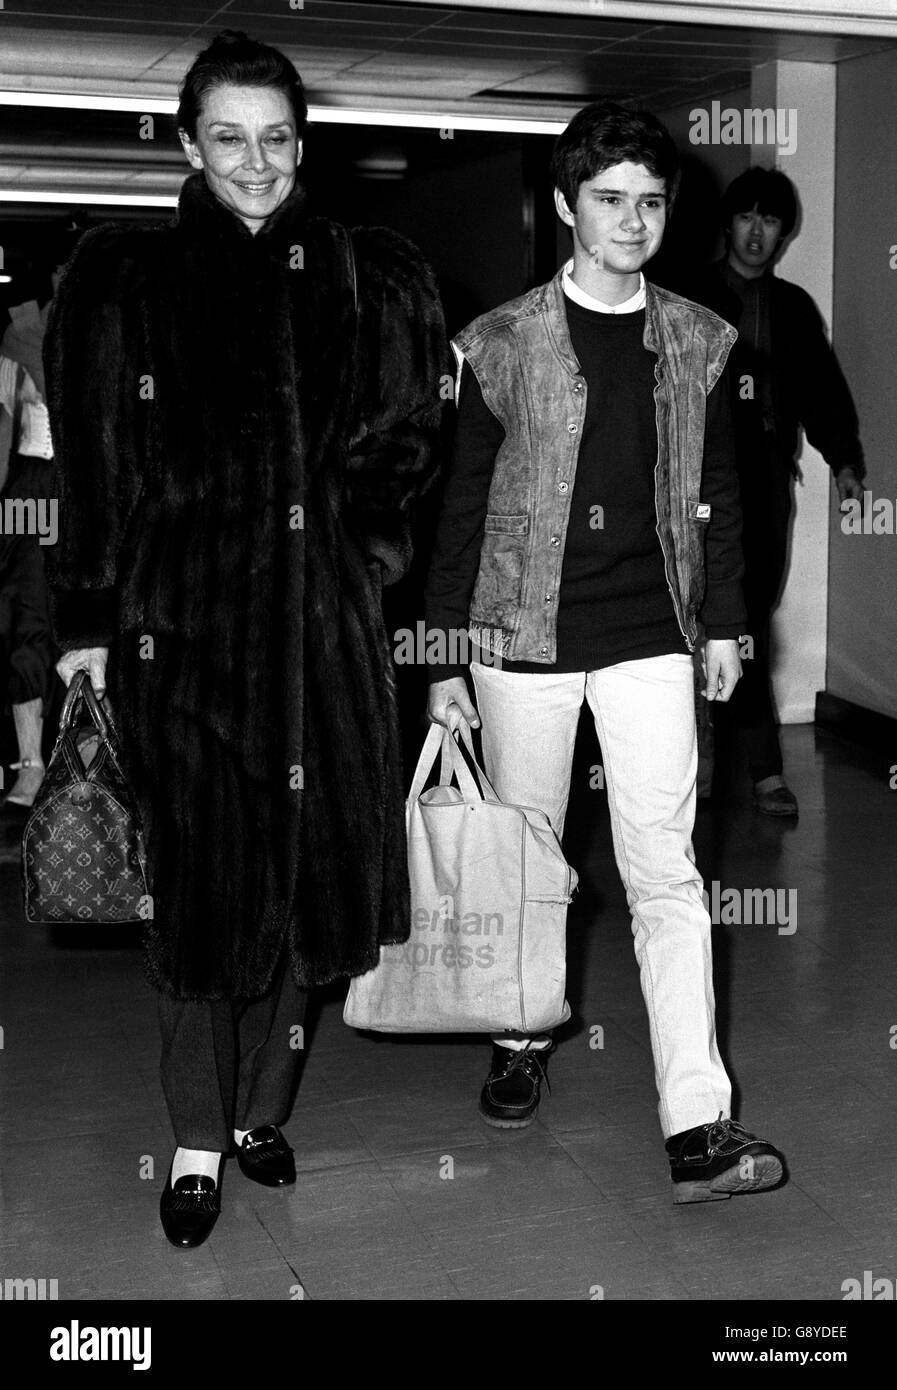 Audrey Hepburn and her son Luca Dotti. Audrey Hepburn (55), and her son Luca Dotti (14), arriving at Heathrow airport, after their flight from Rome. Stock Photo